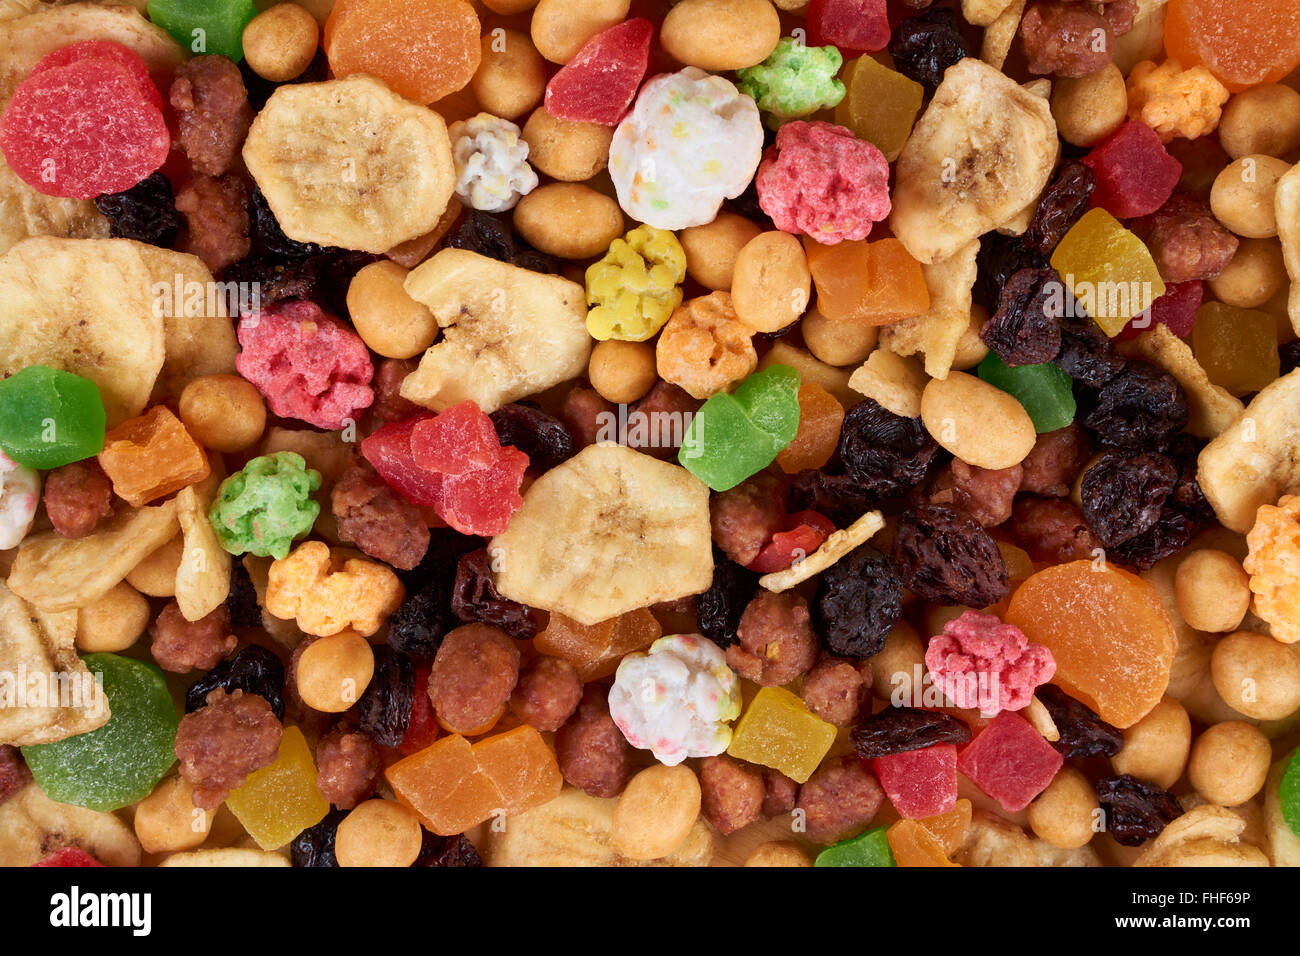 Tasty mix of dried fruits and nuts Stock Photo